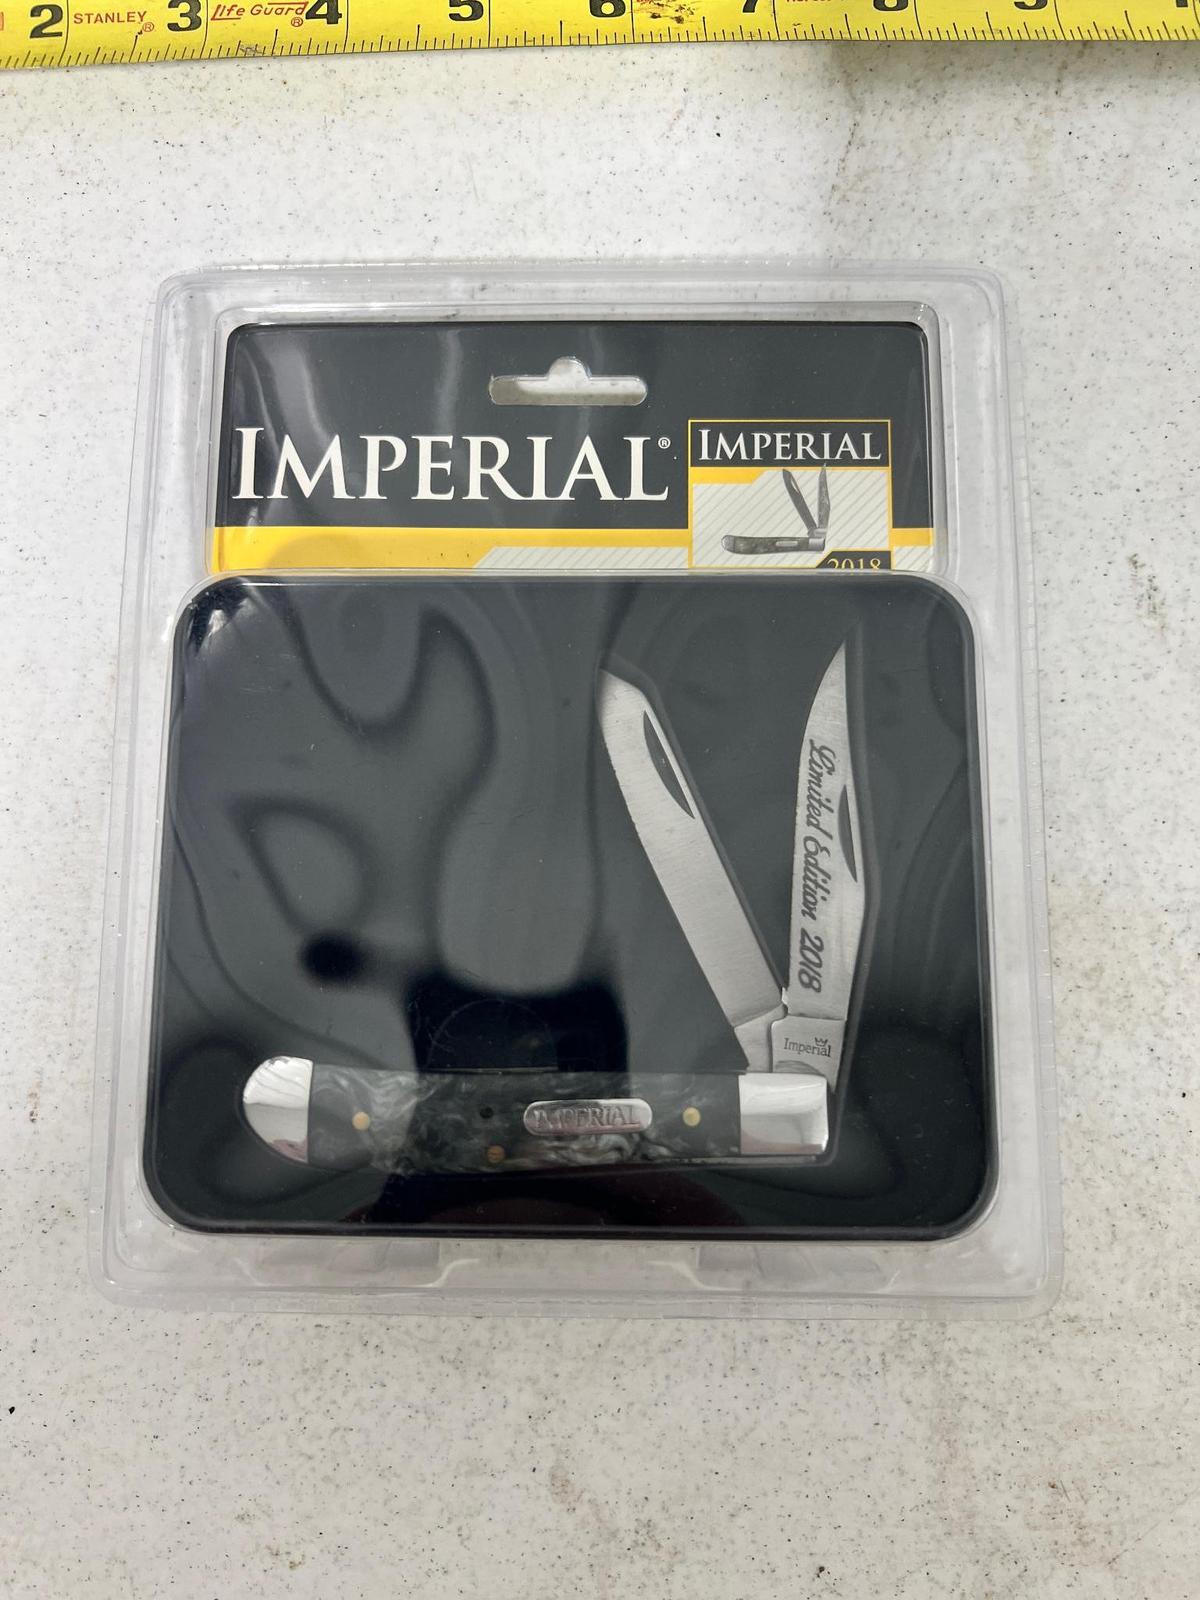 Imperial Limited Edition 2018 Pocket Knife w/ Tin